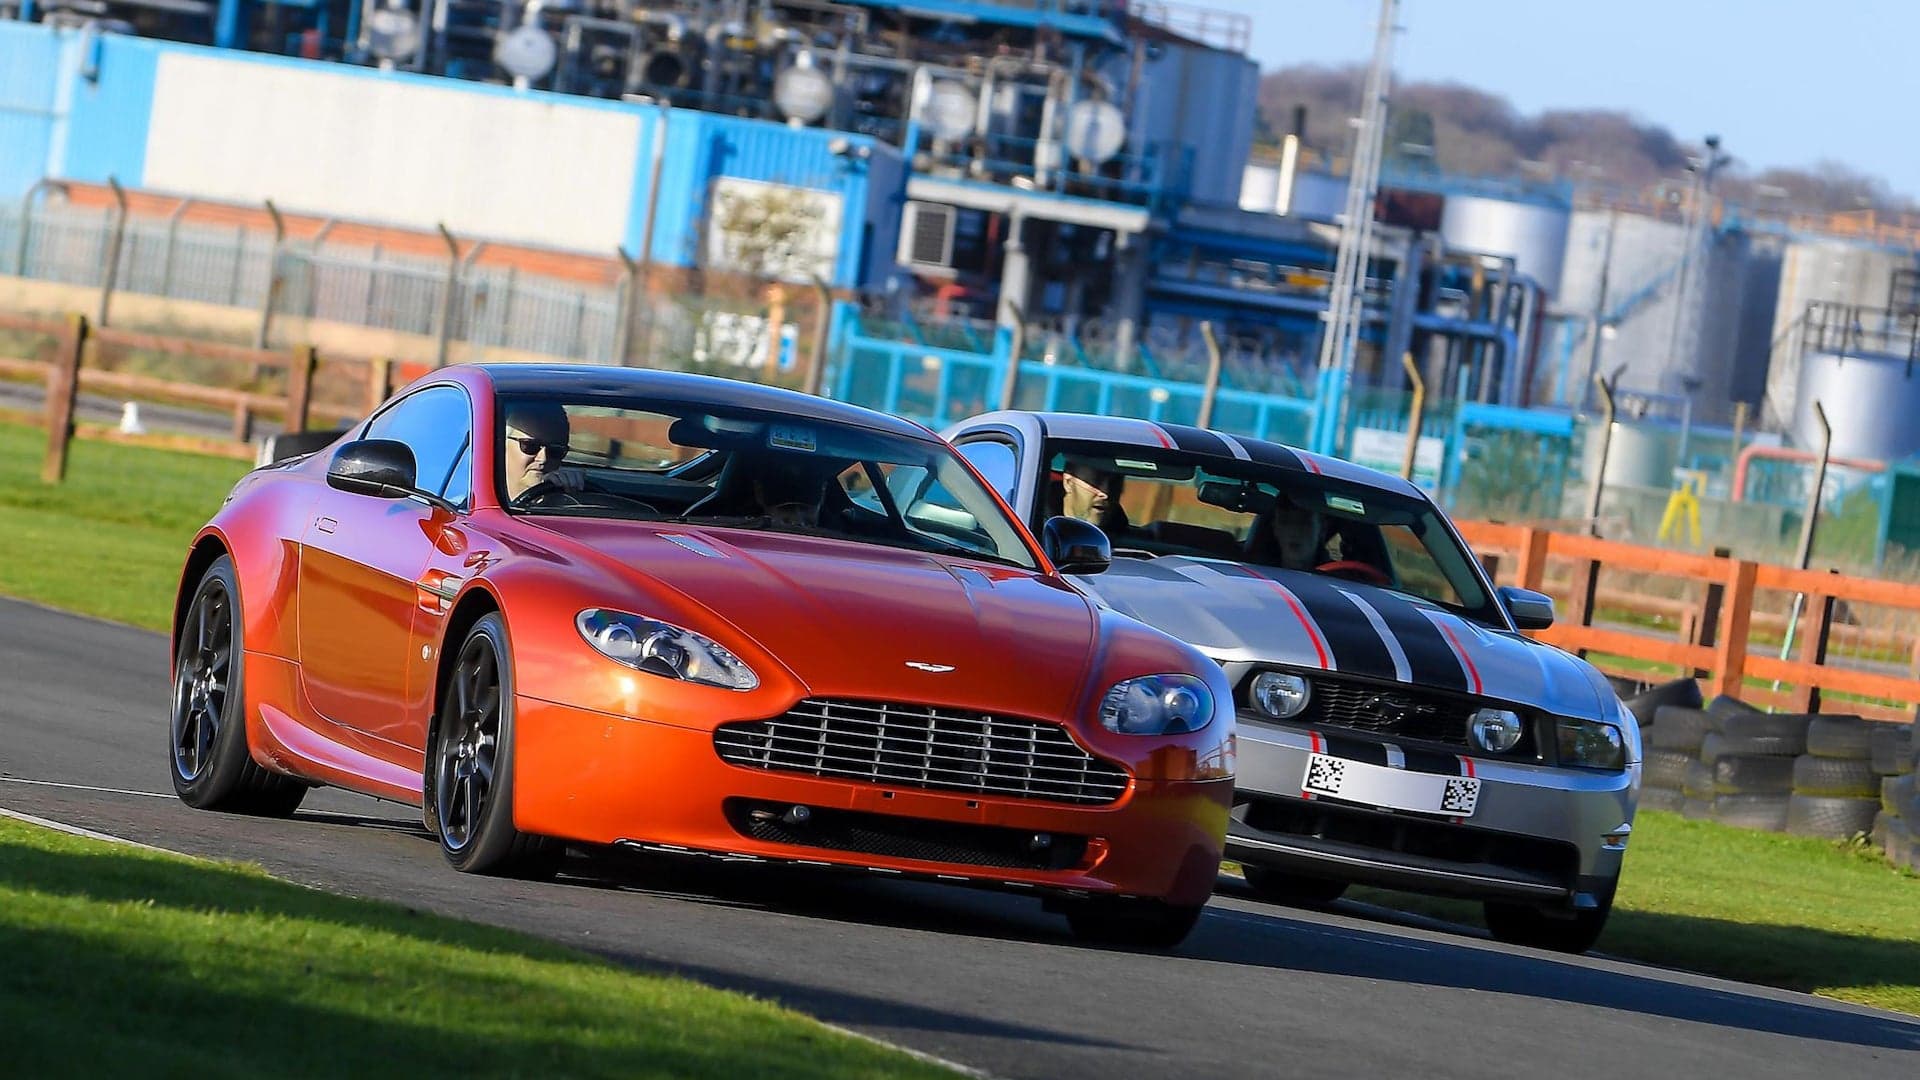 This Exotic Car Rental Company Lets Unlicensed People Drive Supercars for Just $63